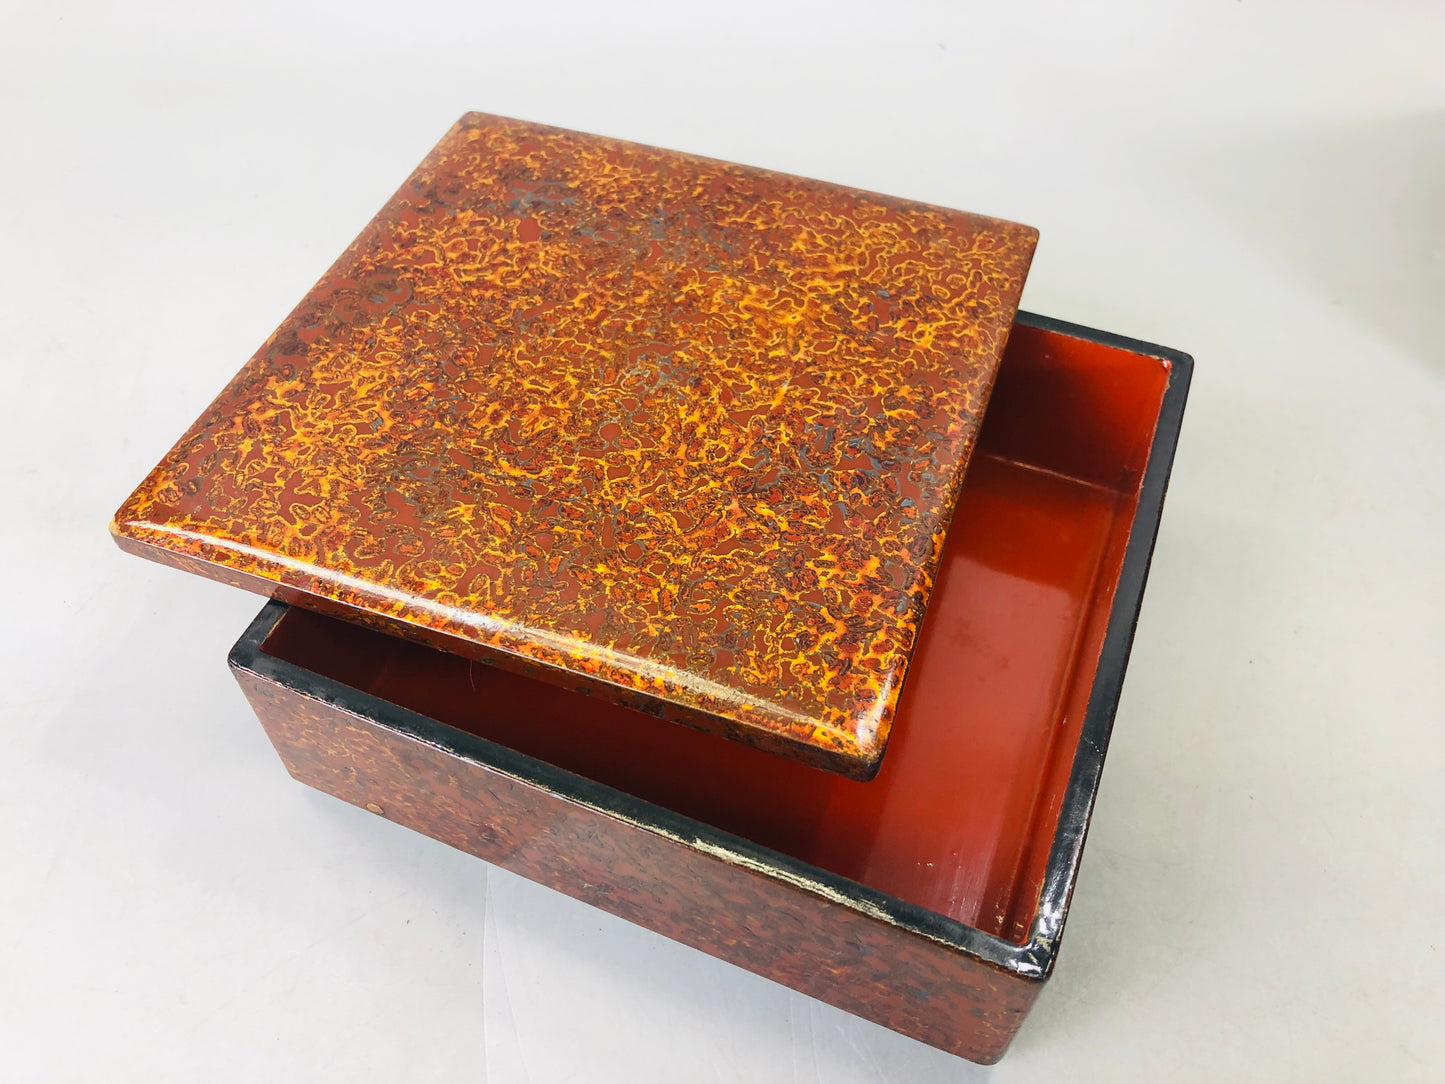 Y6176 [VIDEO] BOX Wakasa Negoro lacquer Lunch layered case Makie container Japan antique